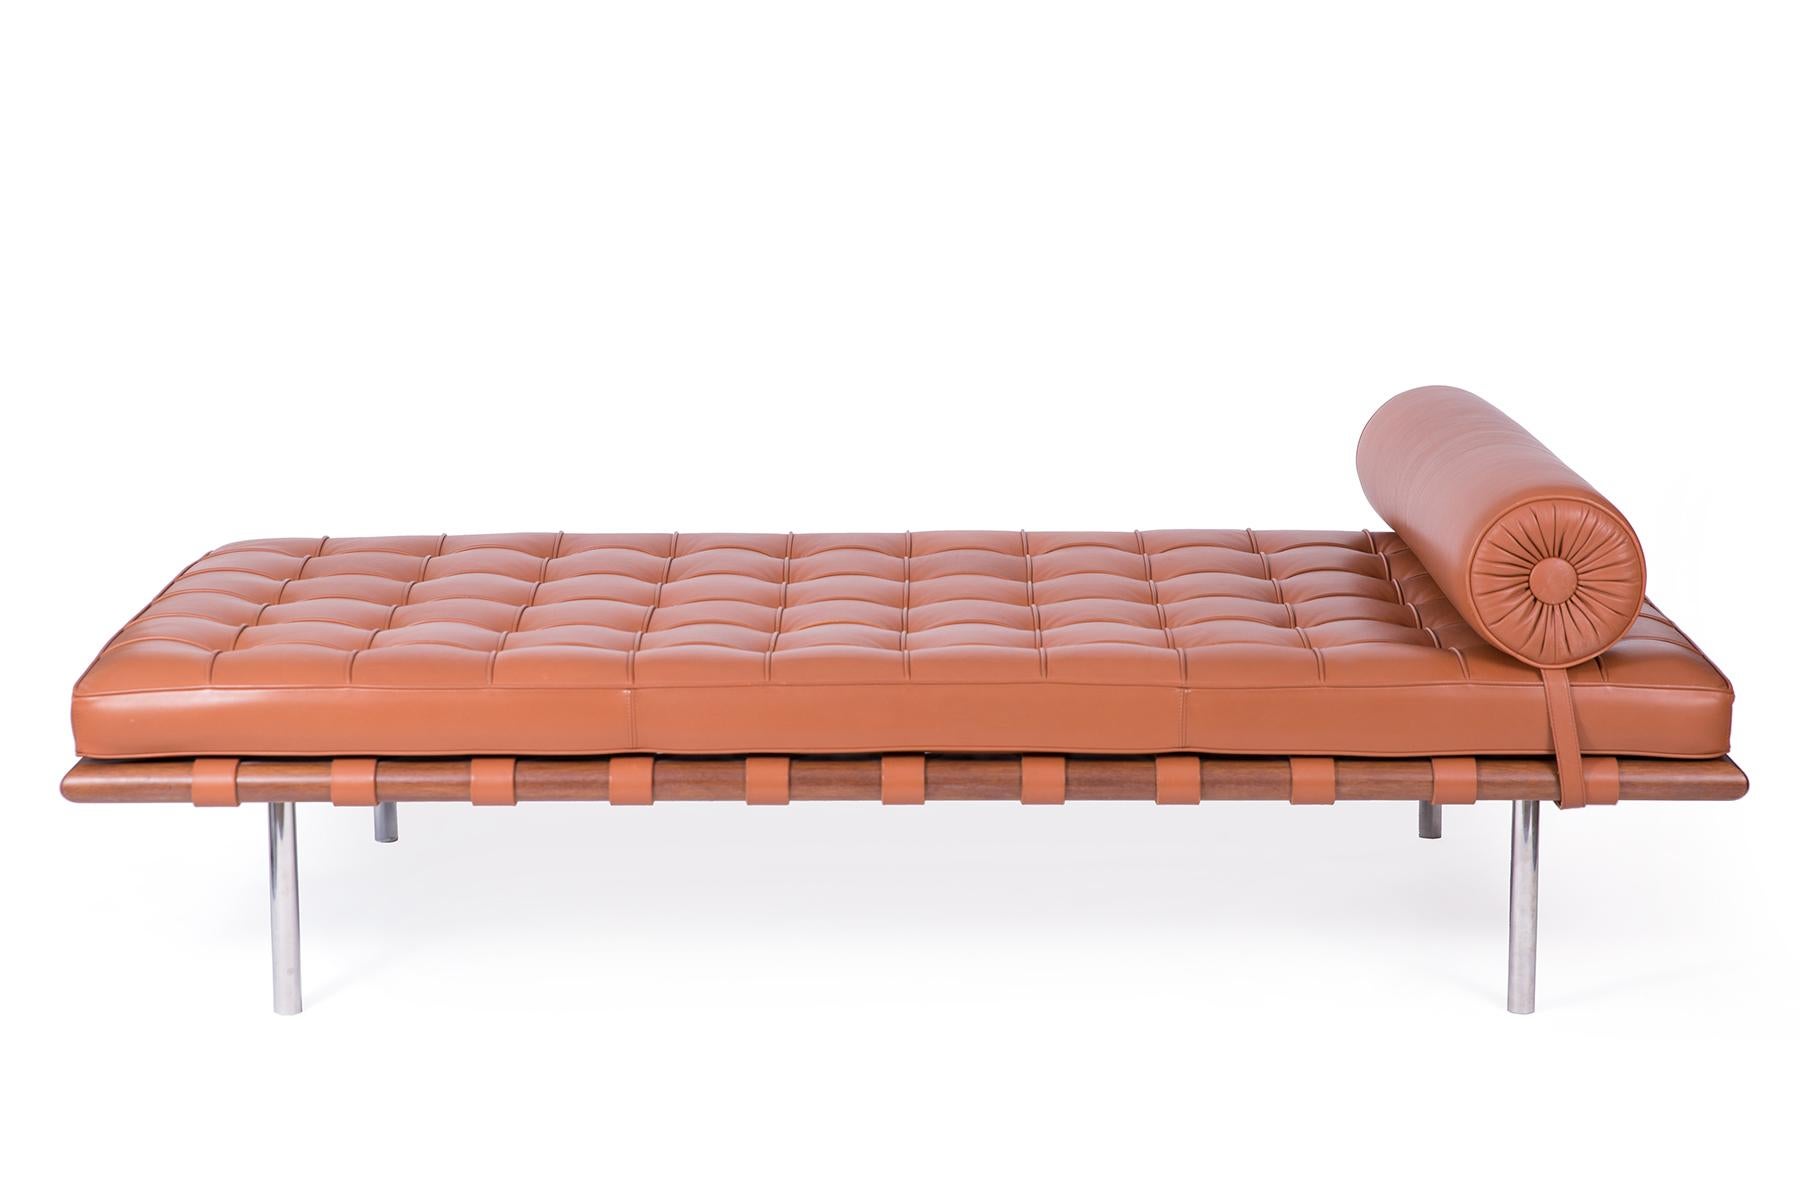 Mies van der Rohe for Knoll Barcelona daybed, circa late 1980s. This all original example is in phenomenal condition with butterscotch leather and walnut frame. 
Labeled.